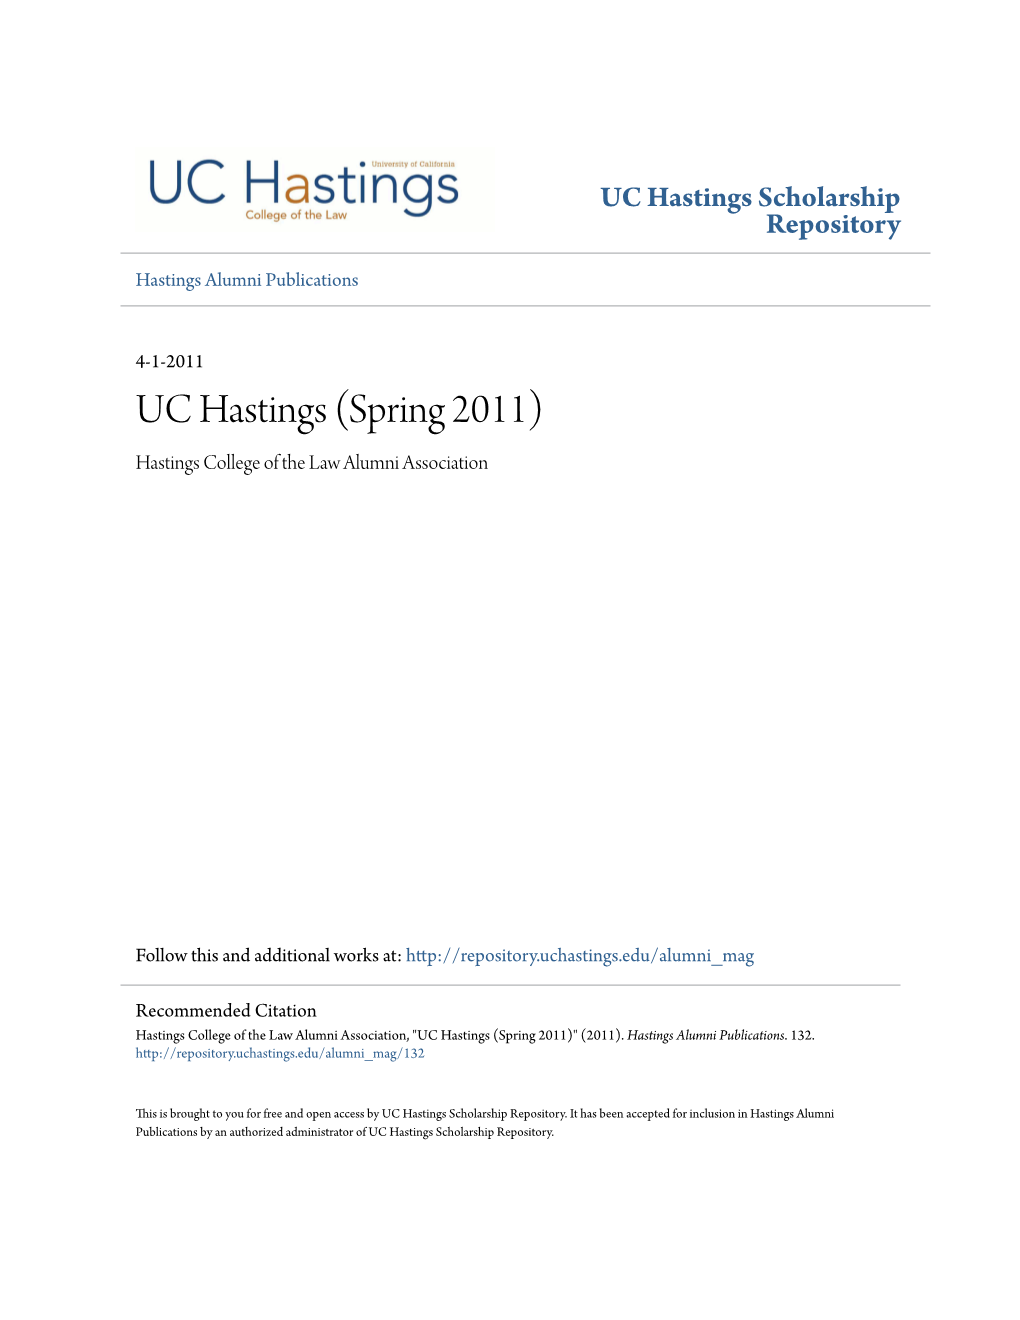 UC Hastings (Spring 2011) Hastings College of the Law Alumni Association